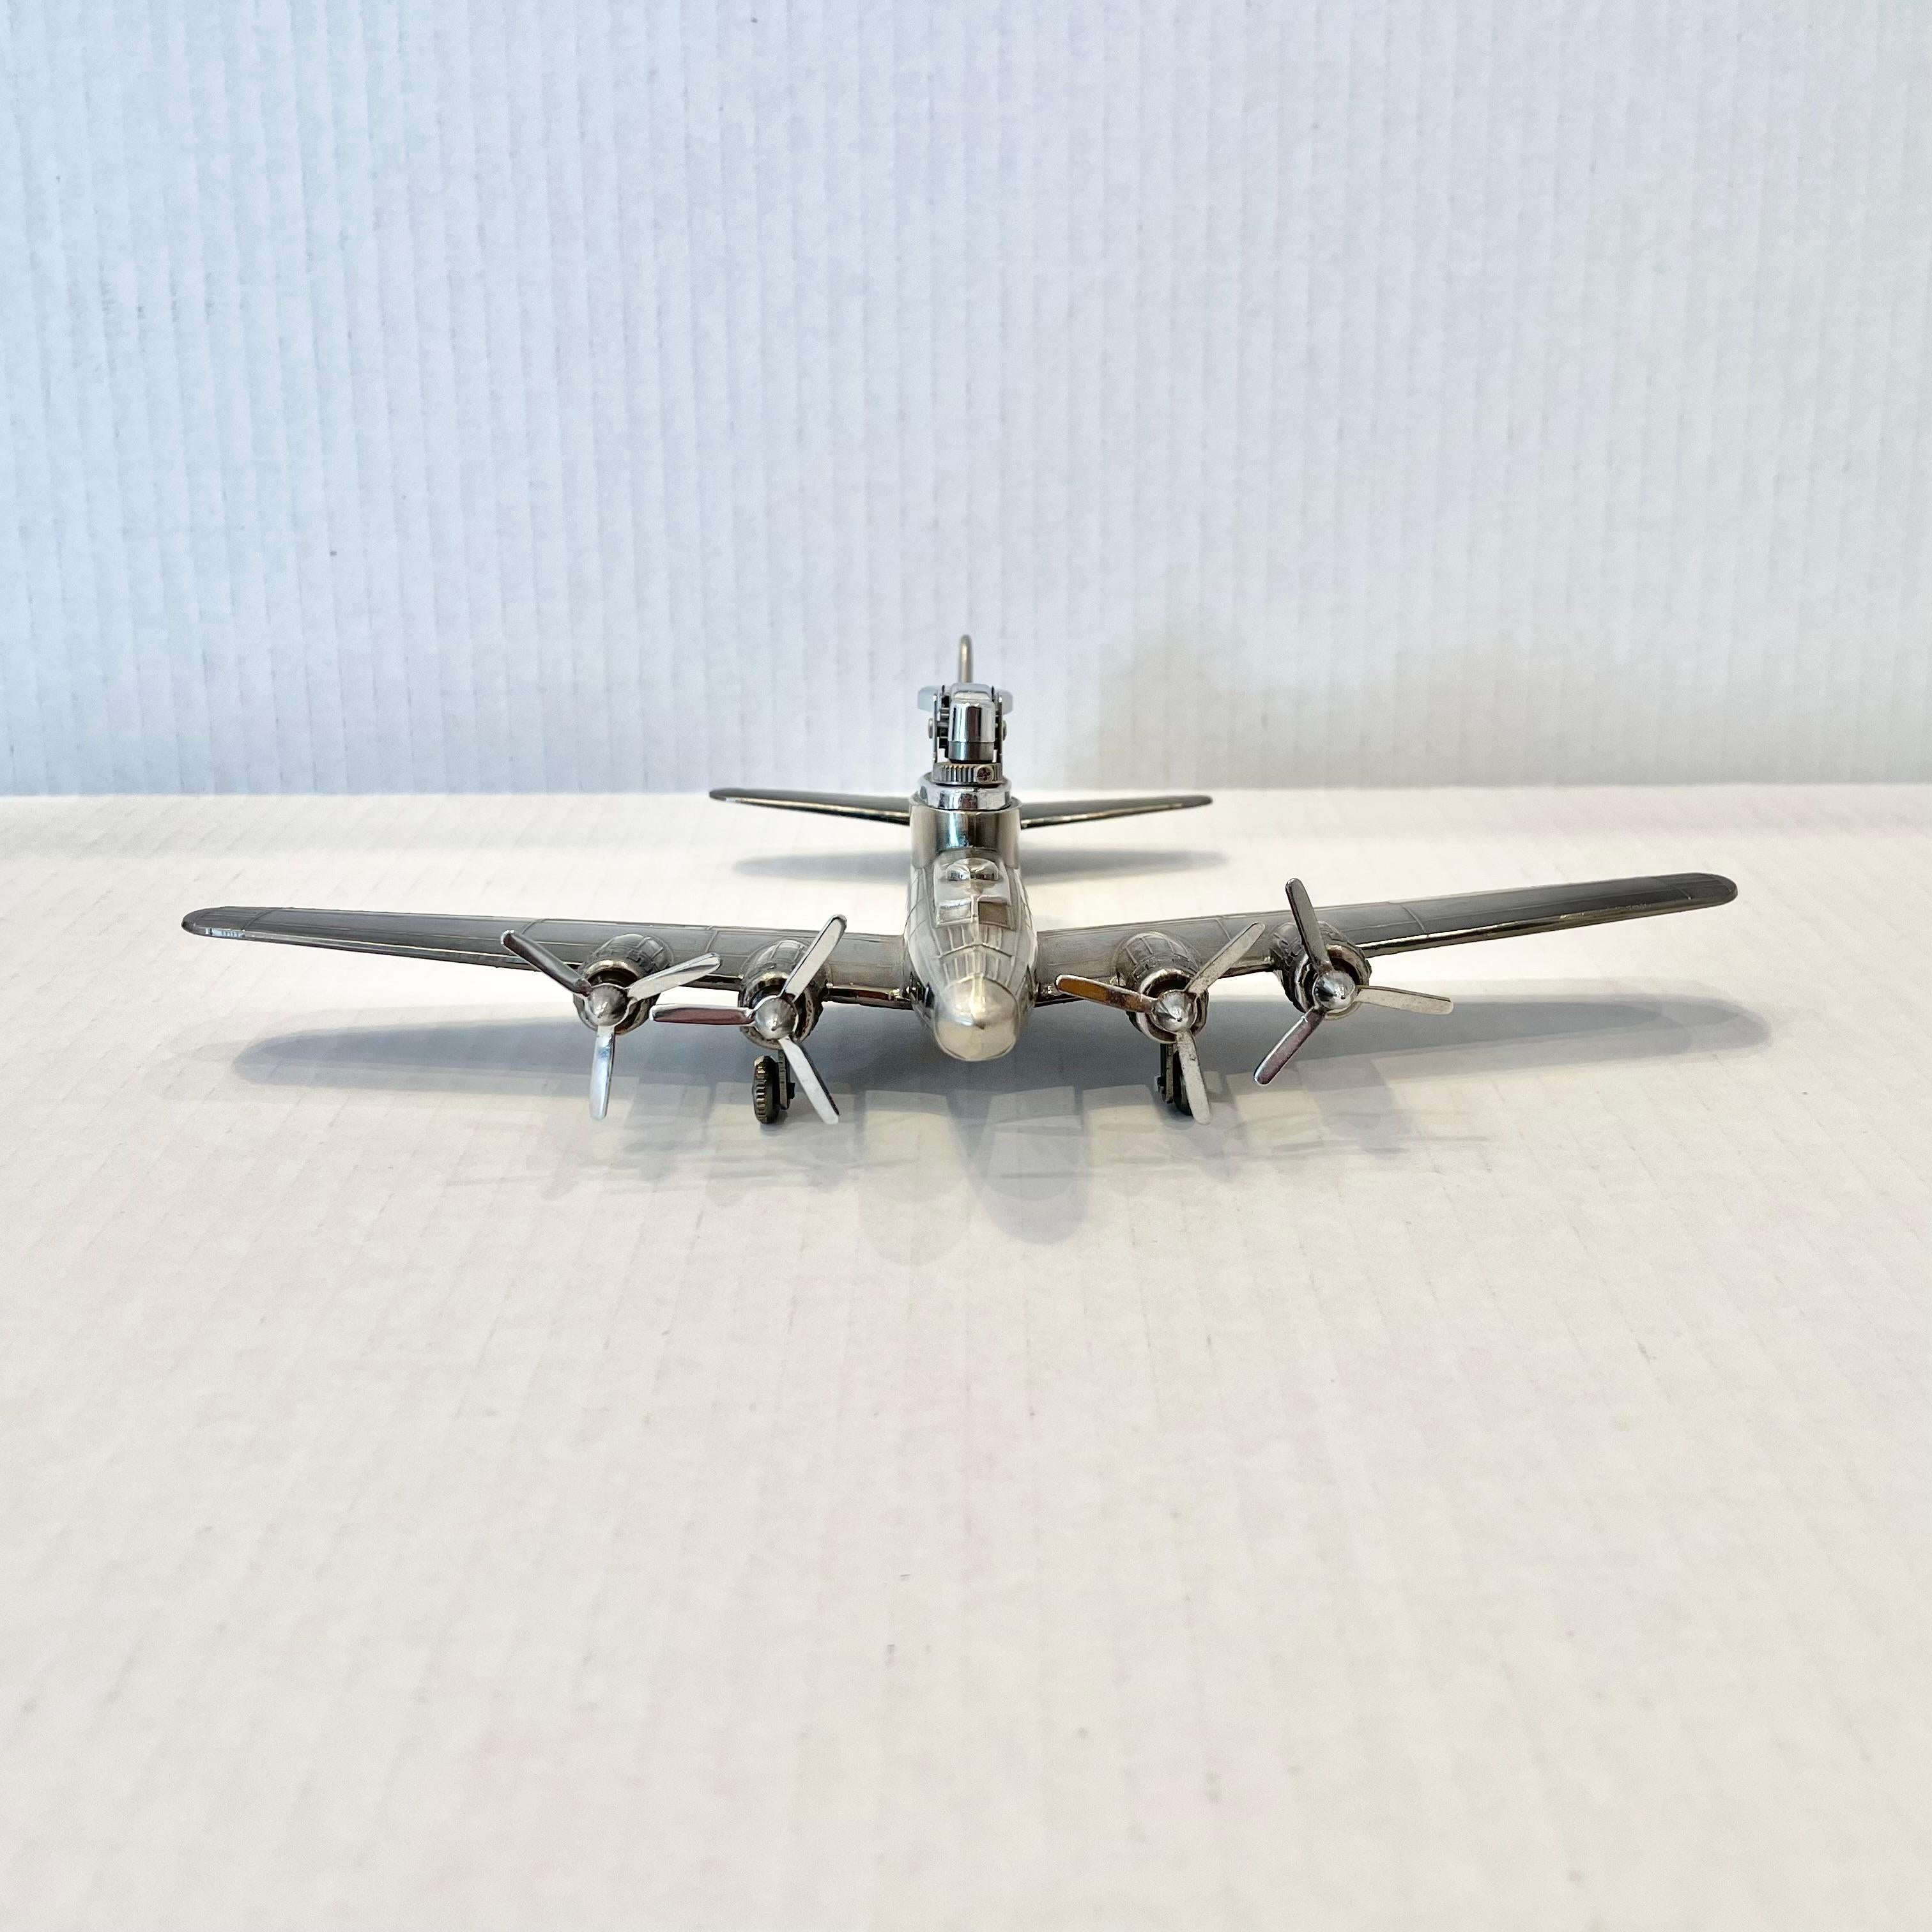 Cool vintage table lighter in the shape of a B-17F bomber plane. Made completely of metal with a hollow body. Beautiful burnished silver color with intricate details. Cool tobacco accessory and conversation piece. Working lighter. Very unusual